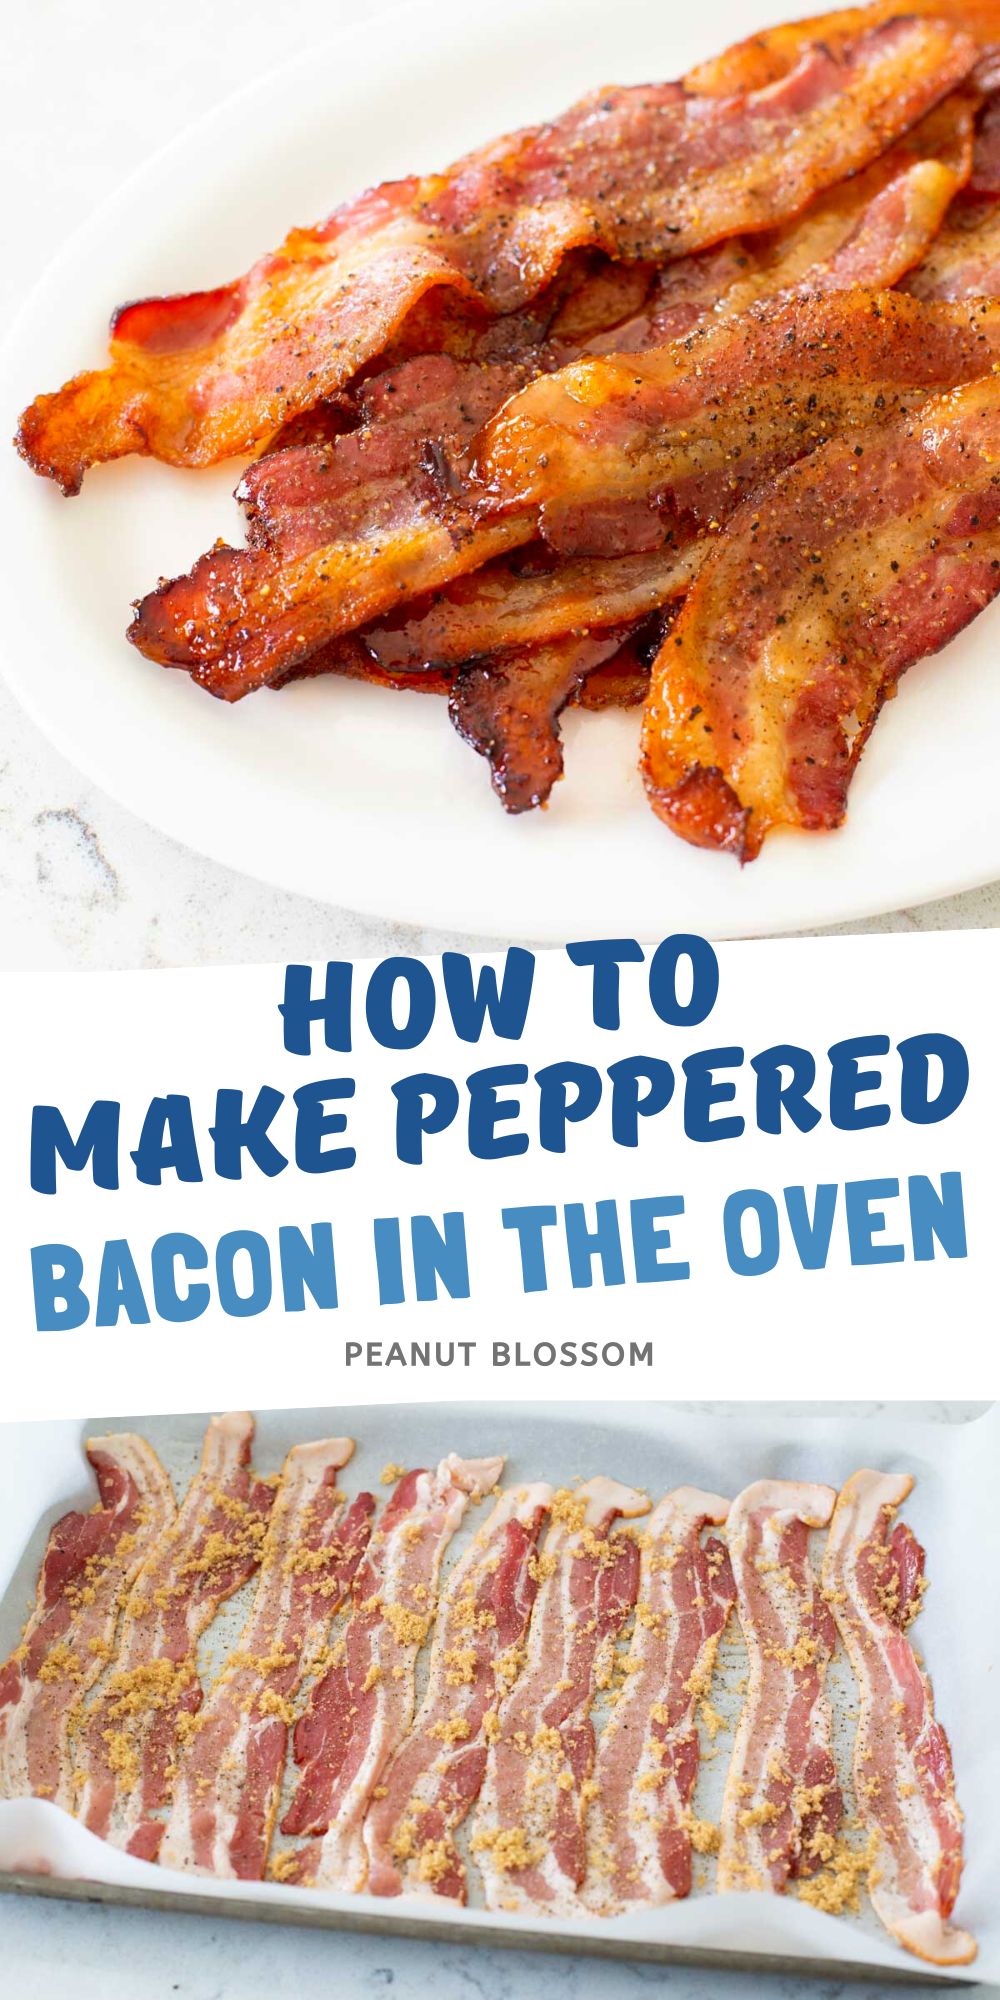 A photo collage shows the baked bacon next to the baking sheet with raw bacon and seasonings.